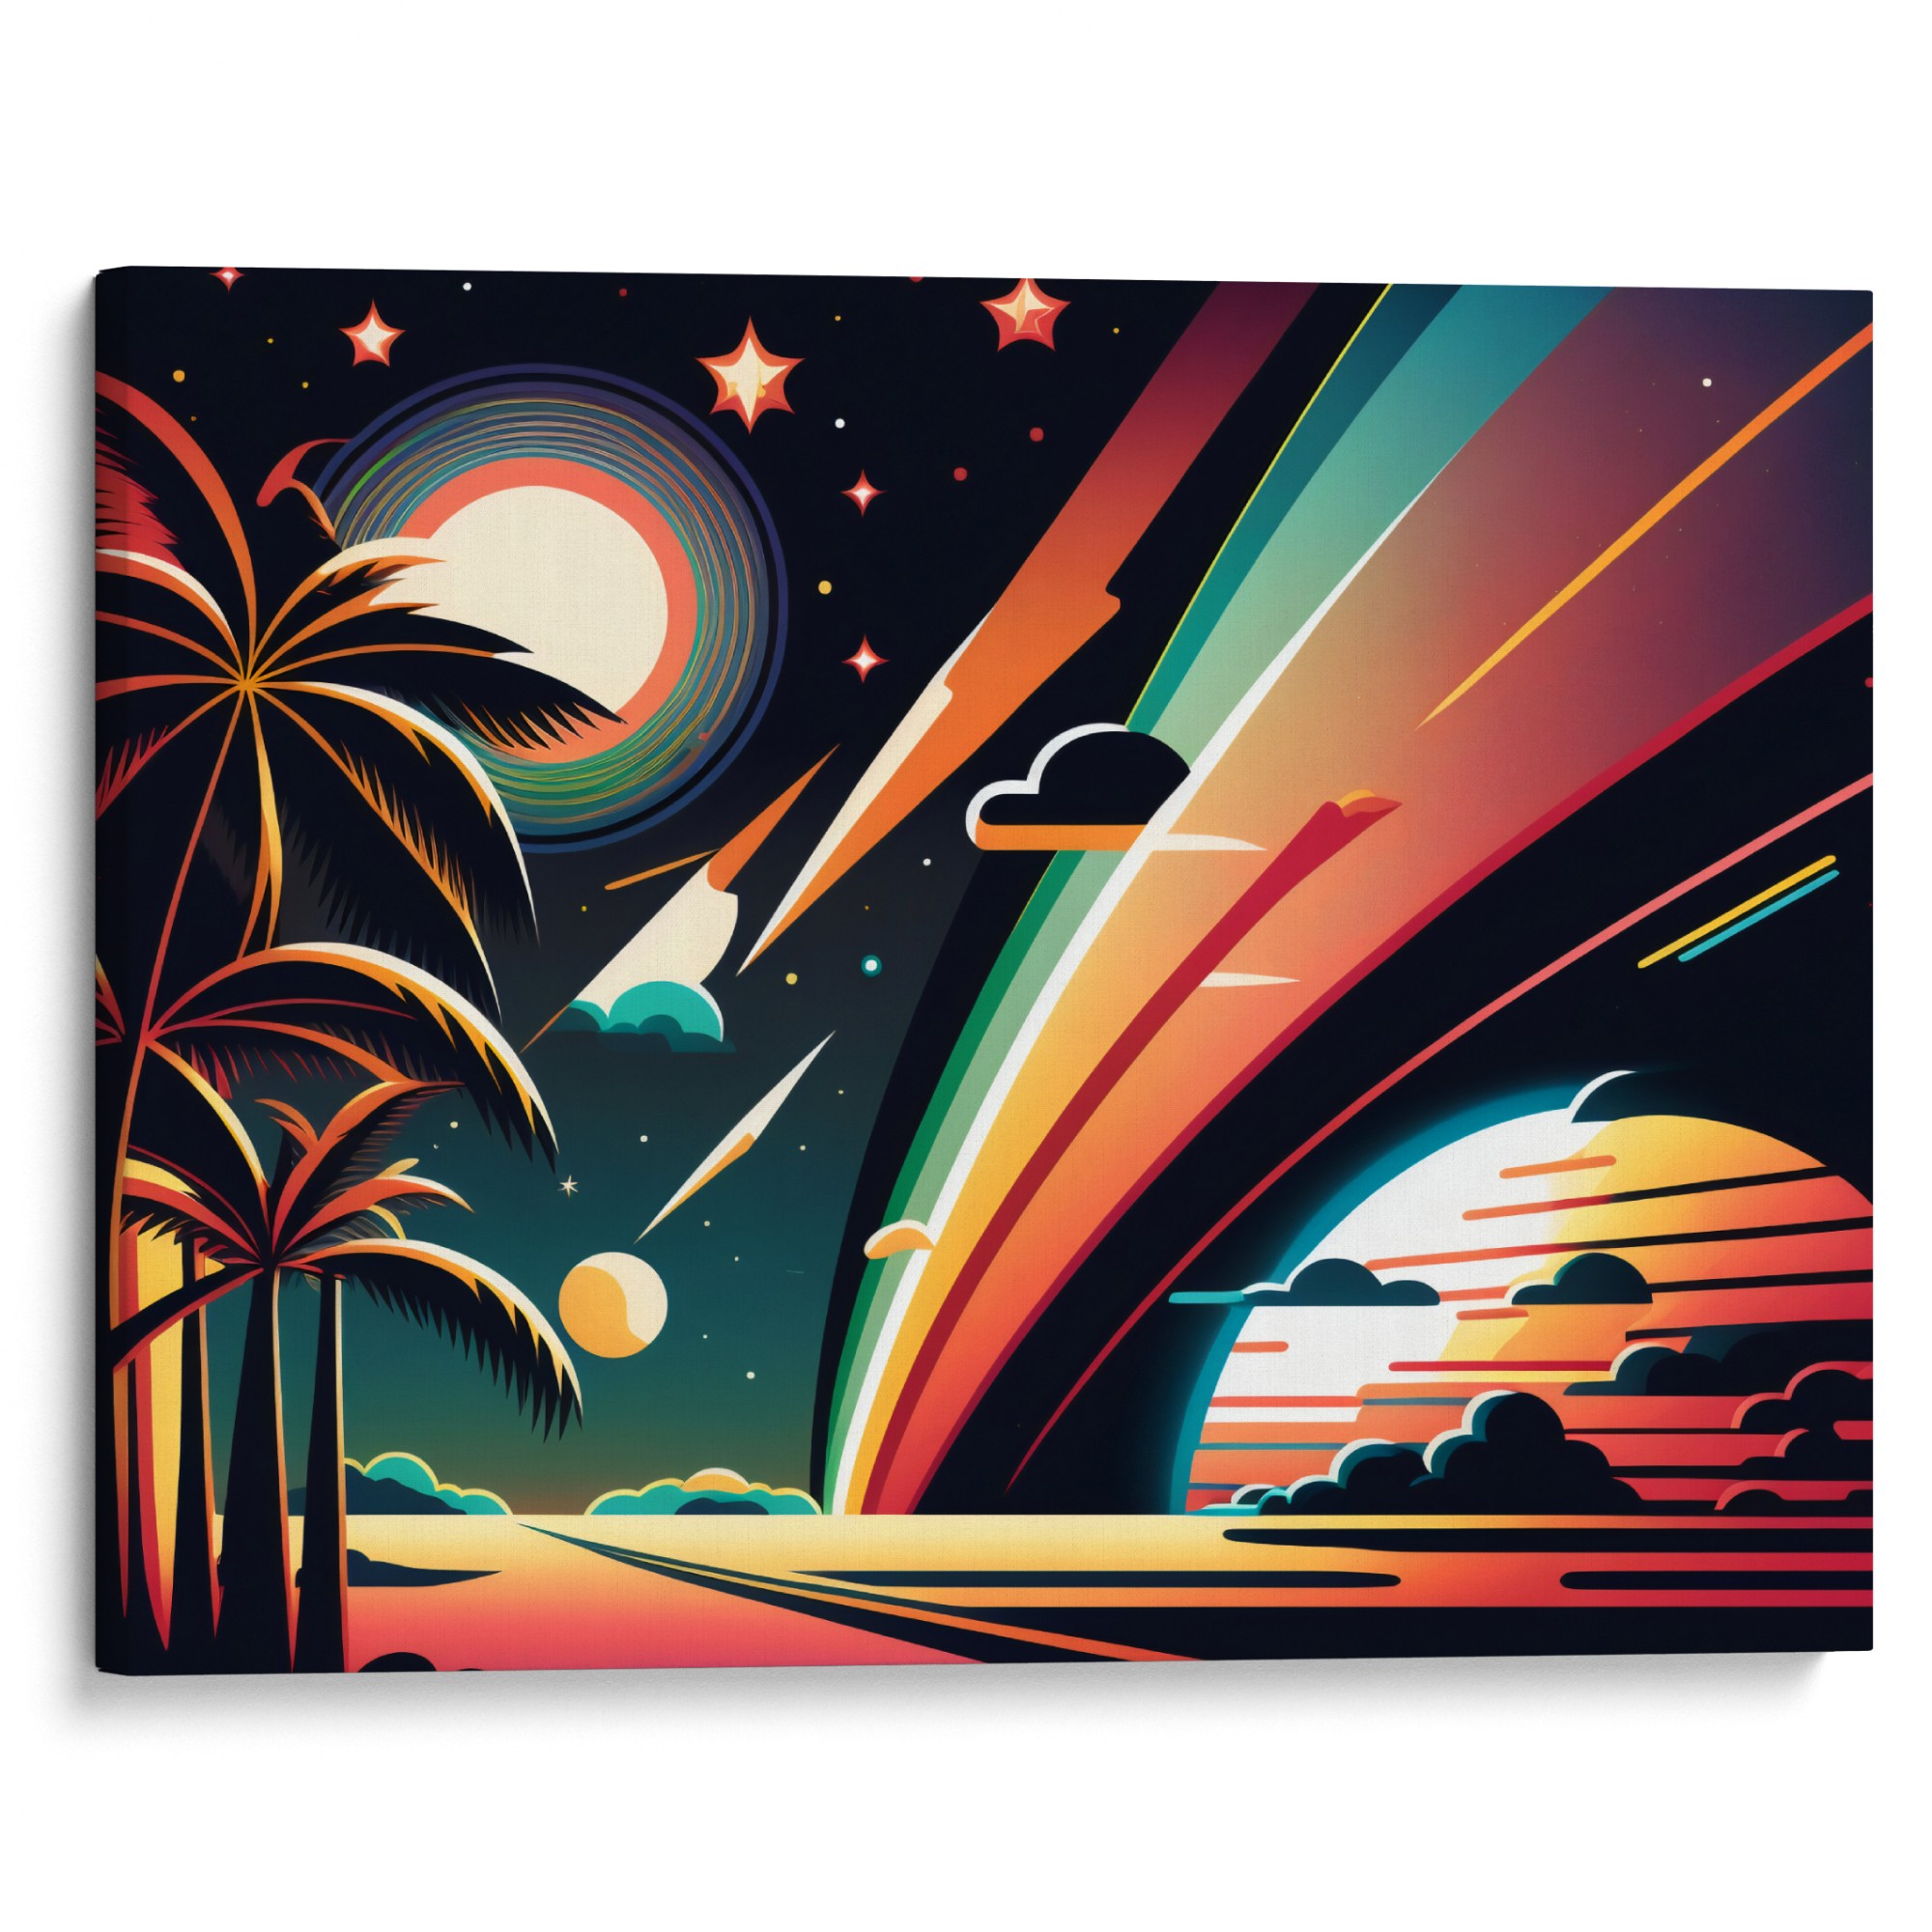 MIDNIGHT MIRAGE Canvas - A blend of sunset, full moon, and cosmic trails in a unique artwork.